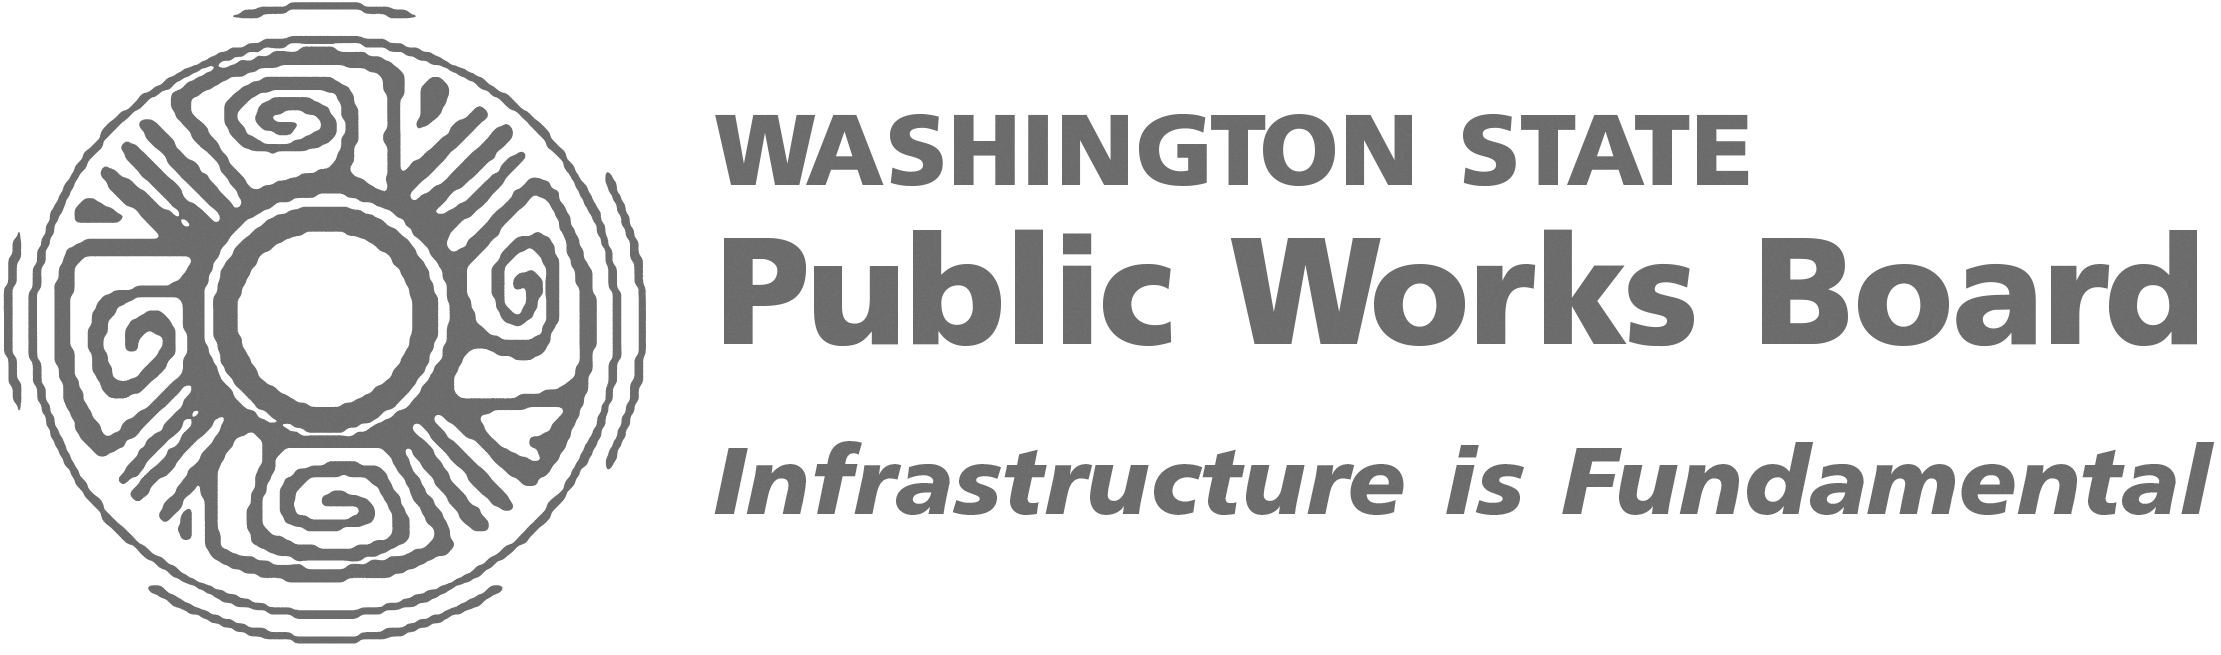 Washington Public Works Board approves $4.37 million for eight critical infrastructure projects